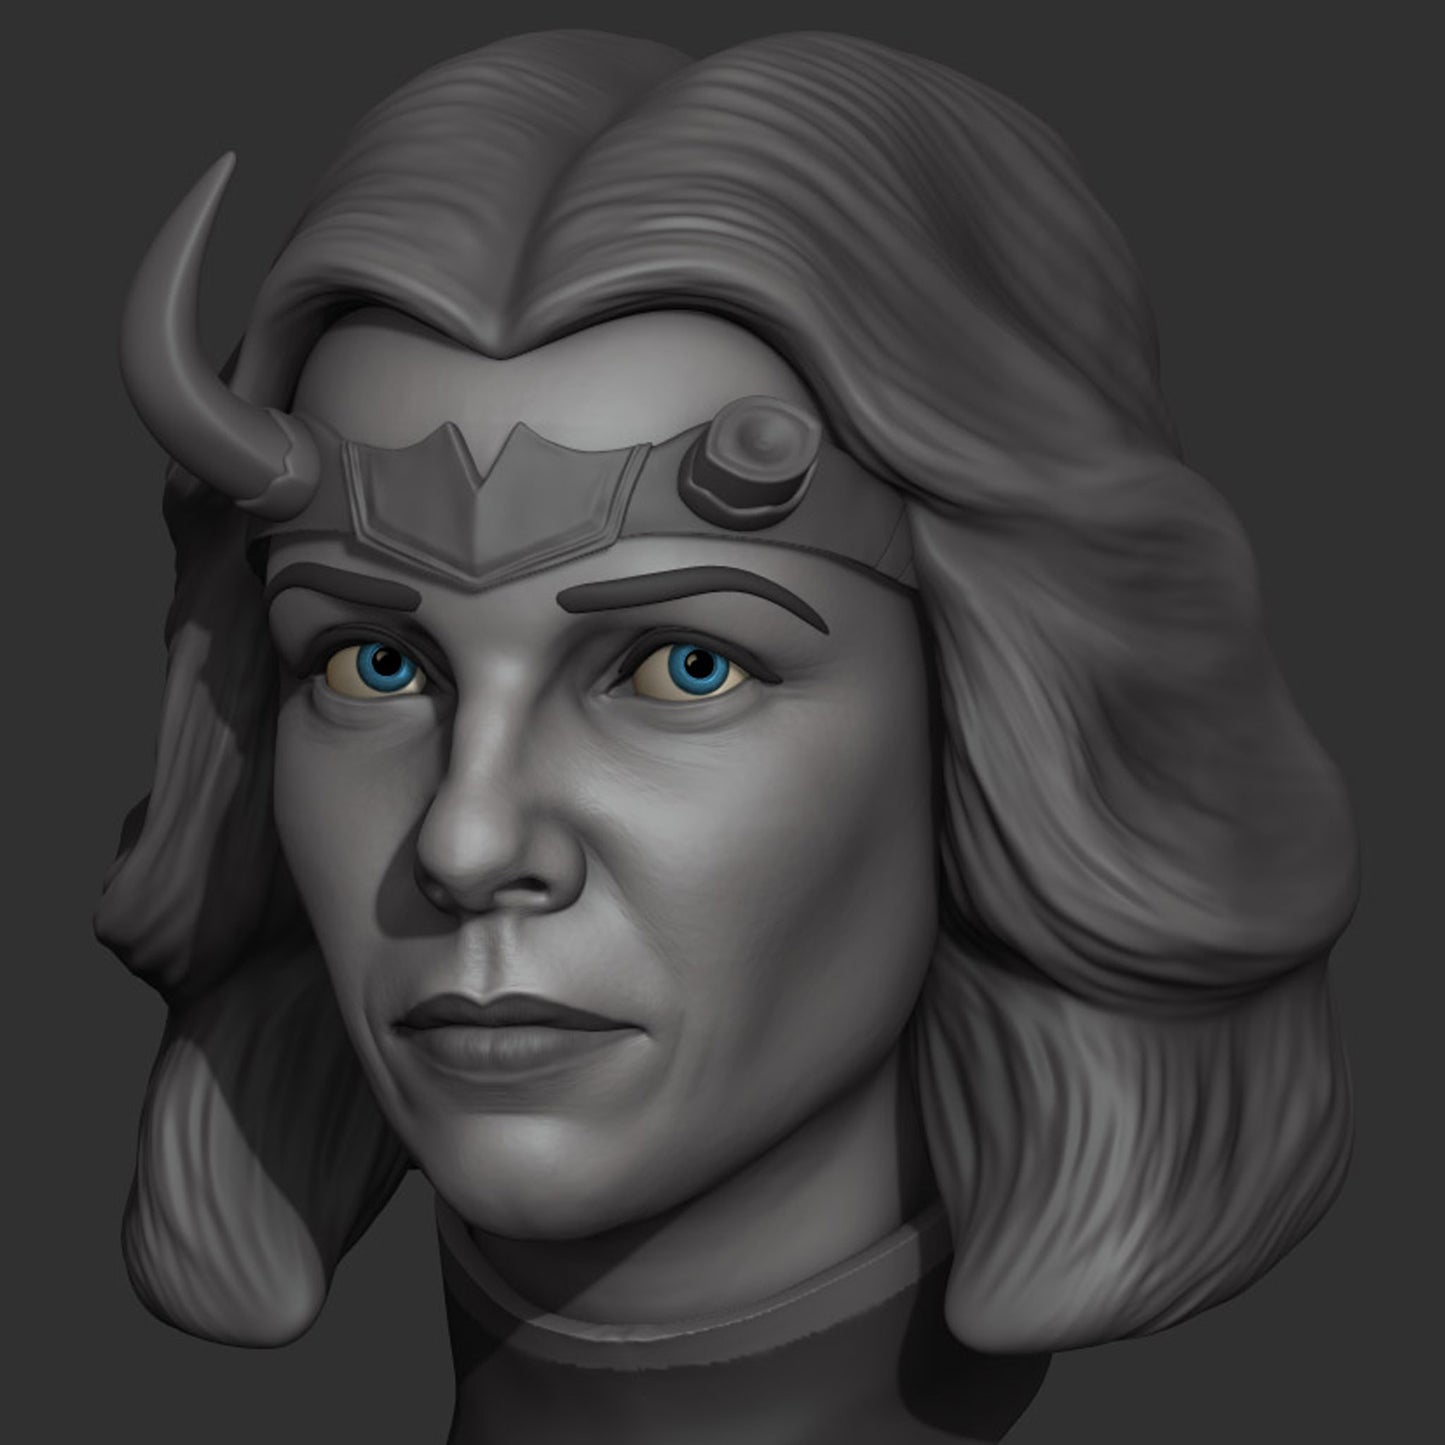 Sophia Di Martino from Loki, sculpted by Marc Spess